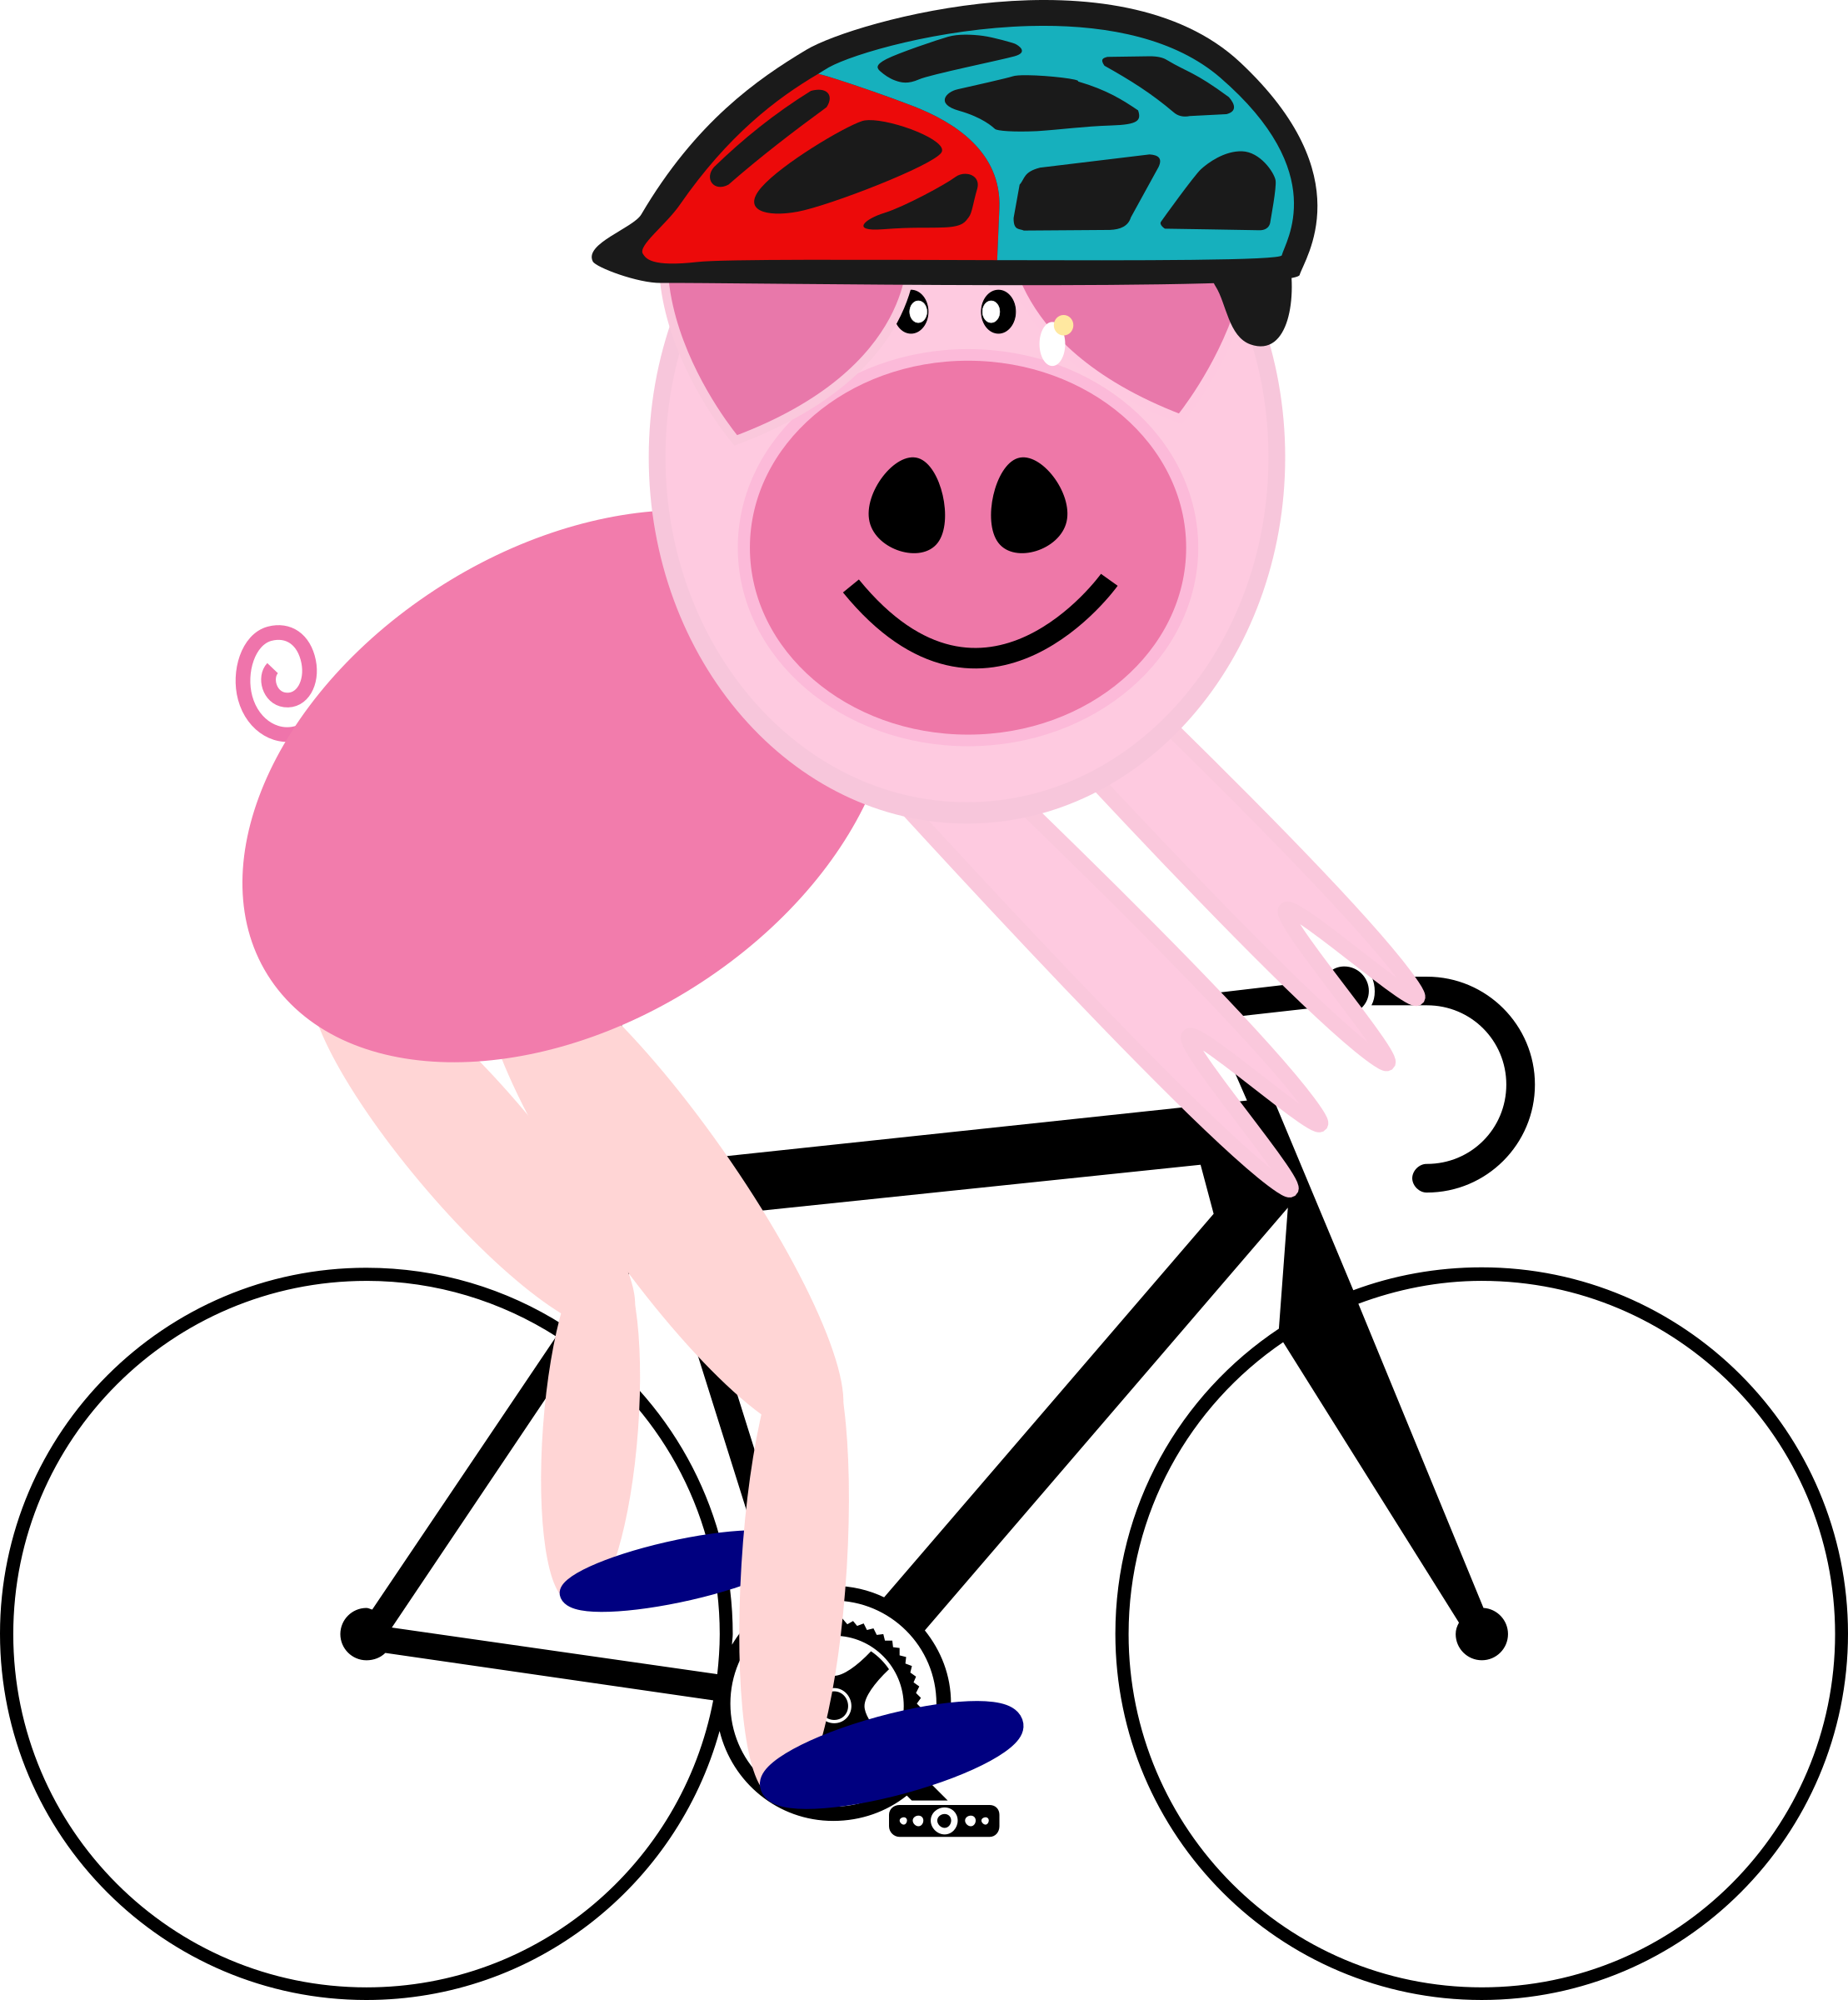 Cycle clipart cycling sport. Pig big image png